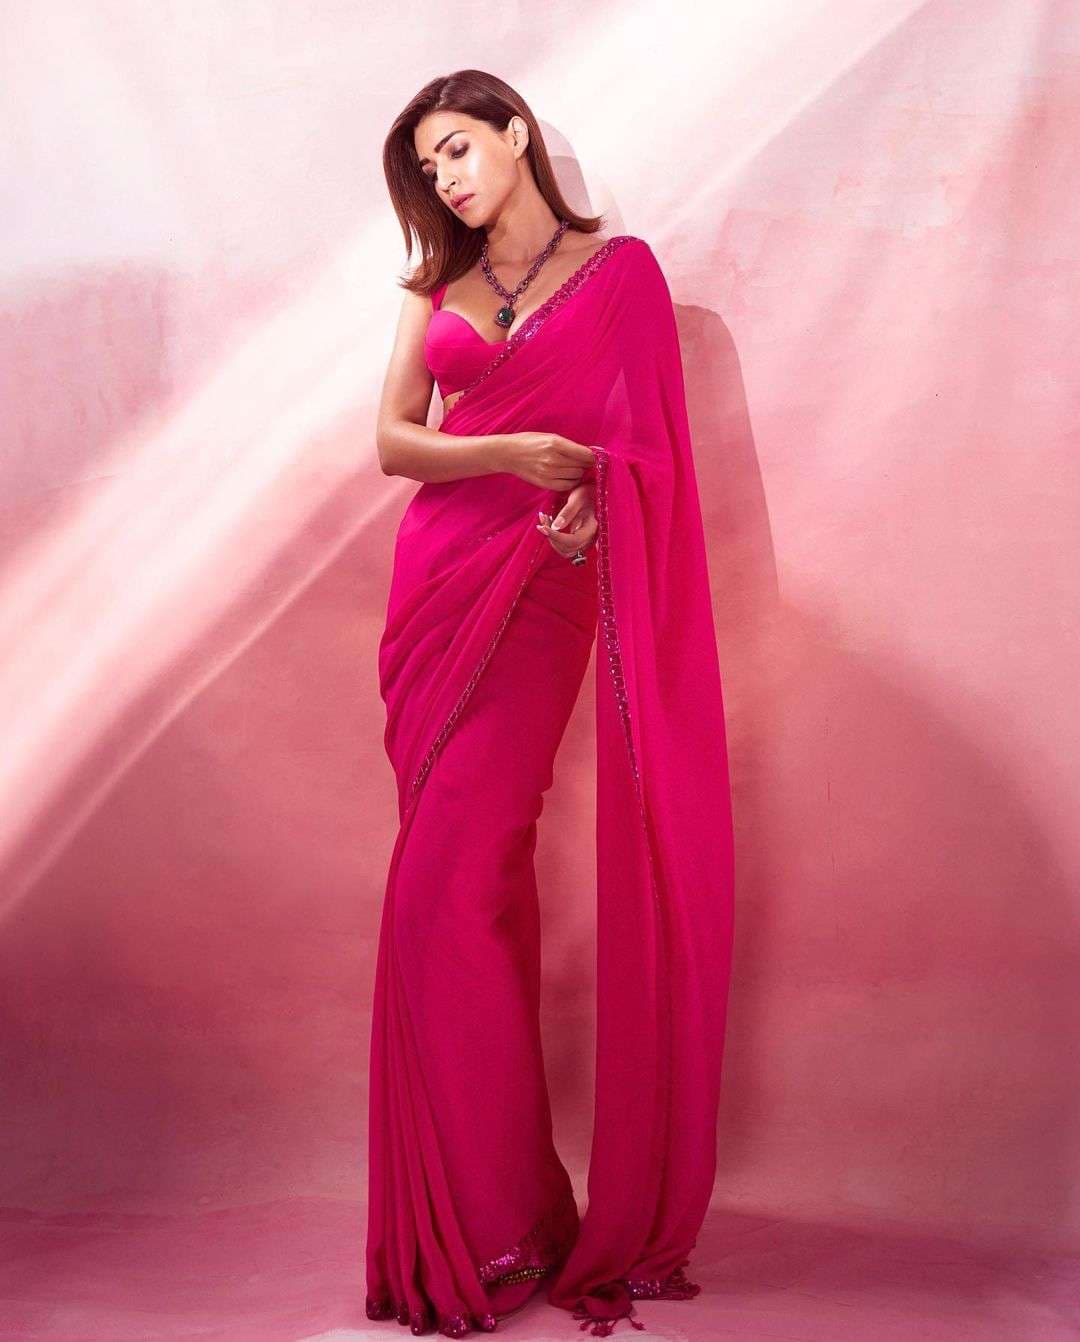 Kriti Sanon who played Bollywood first female robot got photoshoot done in pink saree